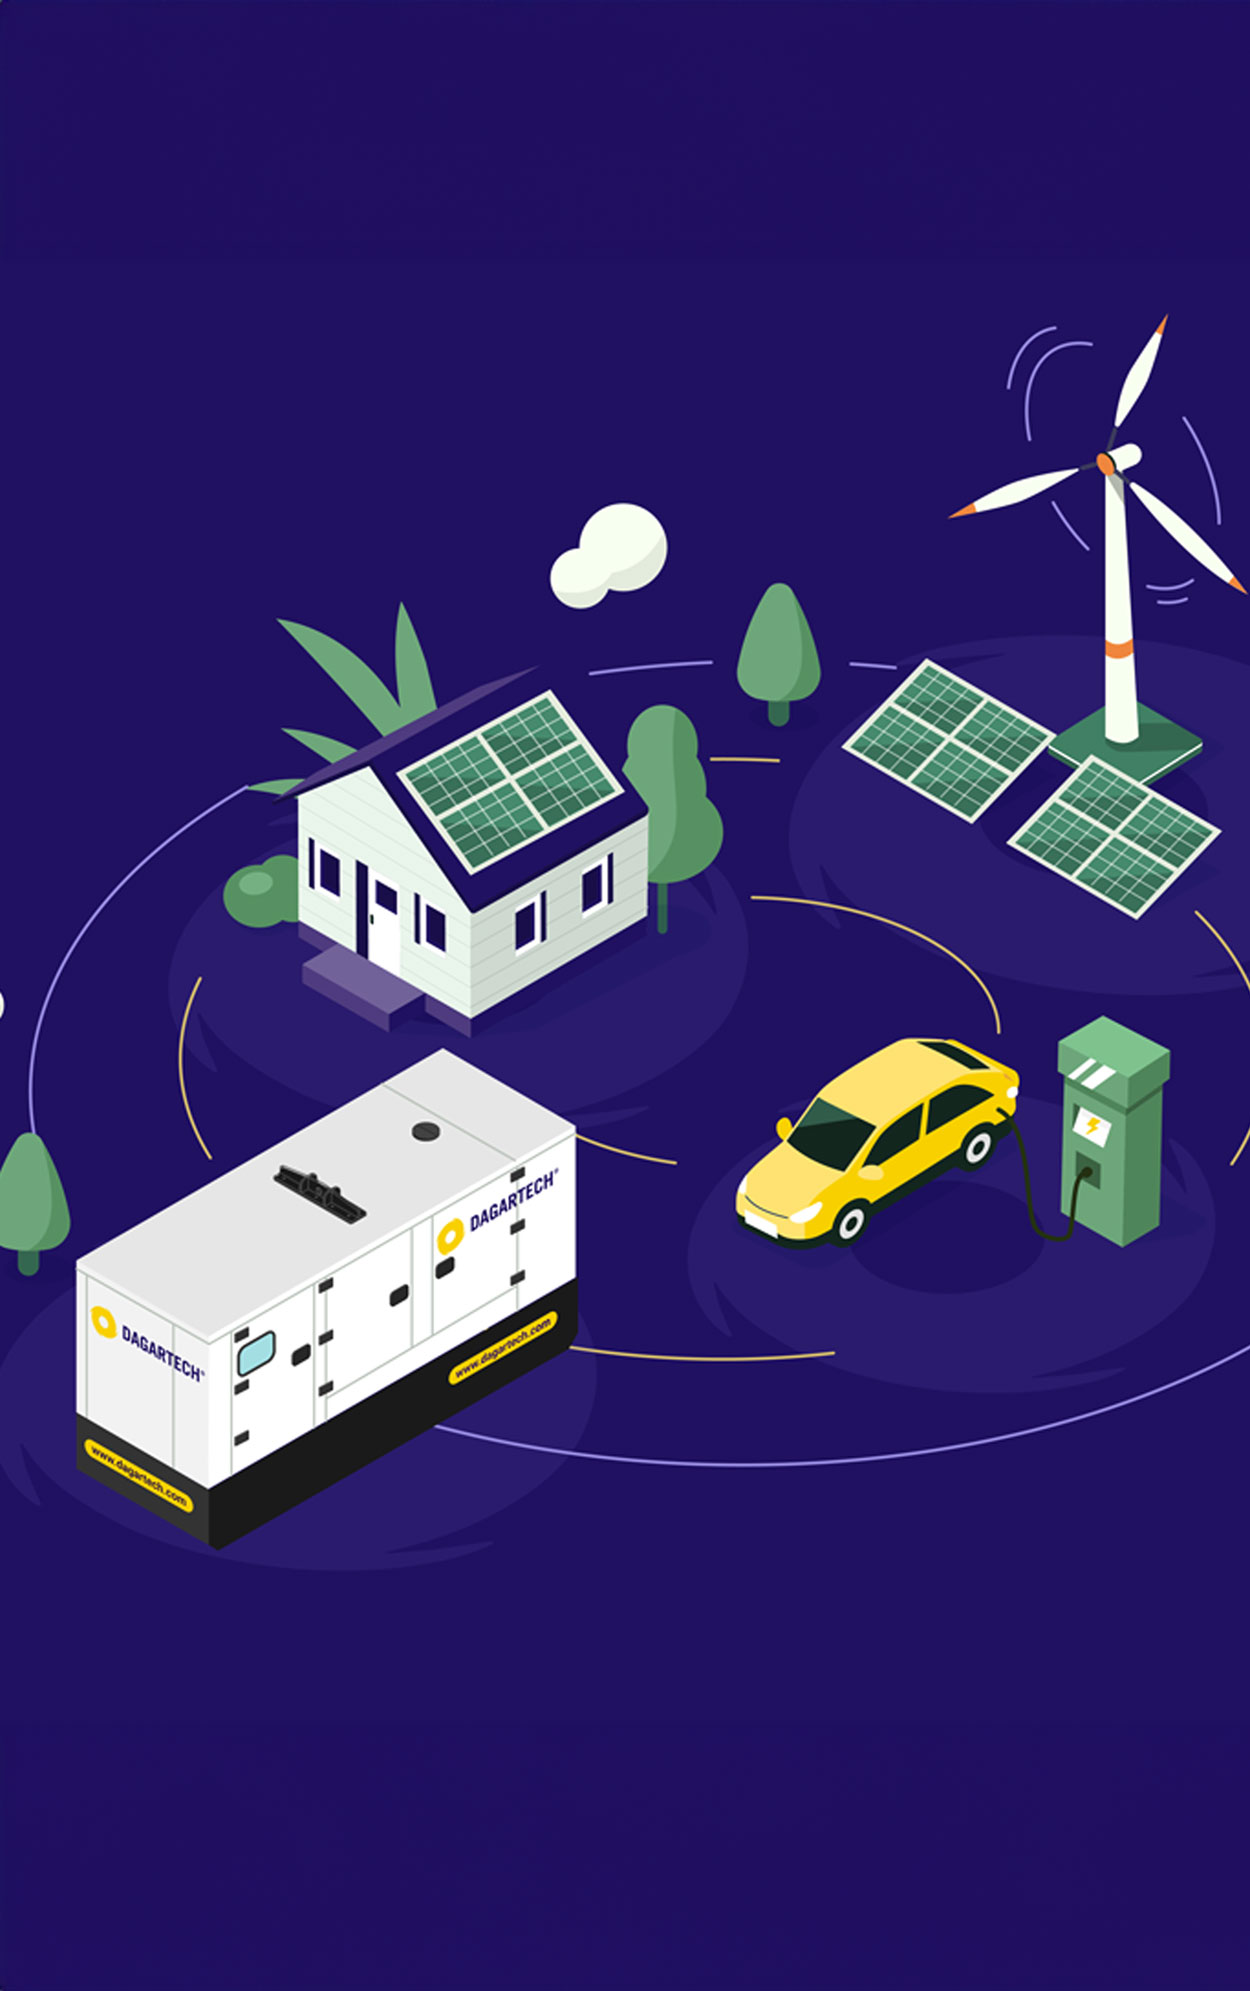 Generator sets and microgrids: energy solutions of the present with great future prospects